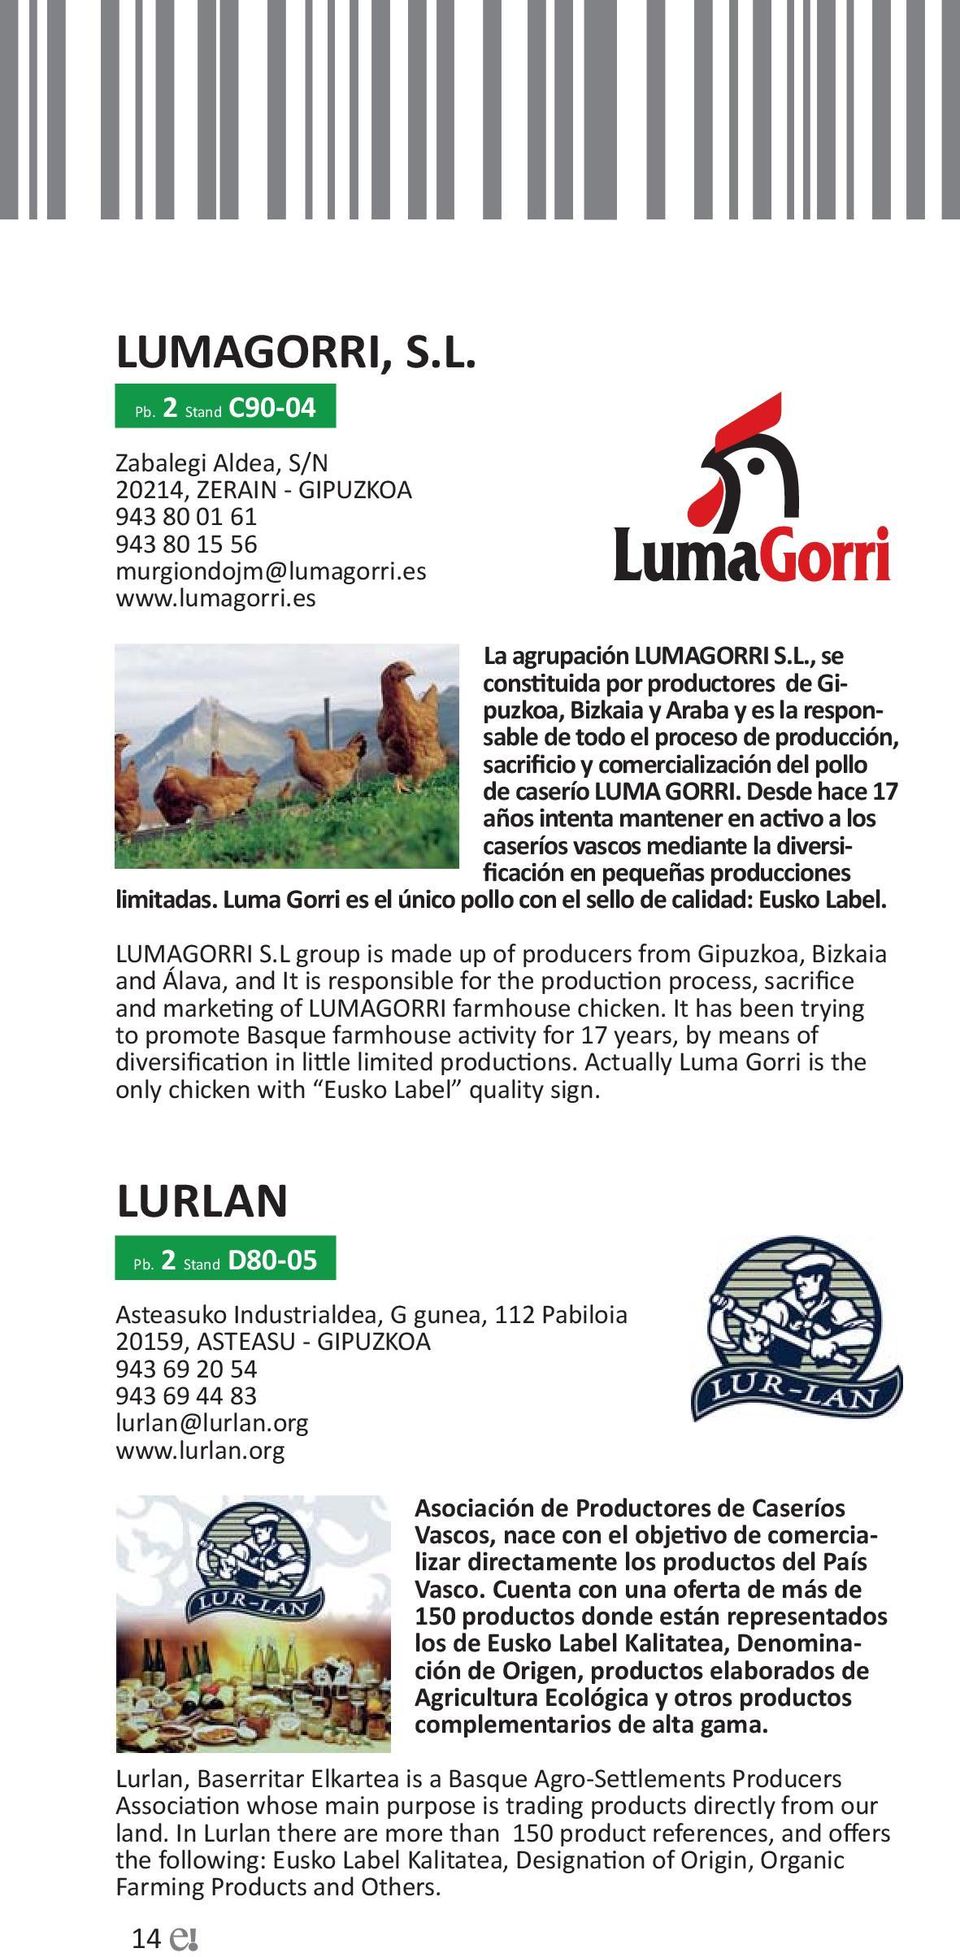 LUMAGORRI S.L group is made up of producers from Gipuzkoa, Bizkaia and Álava, and It is responsible for the production process, sacrifice and marketing of LUMAGORRI farmhouse chicken.